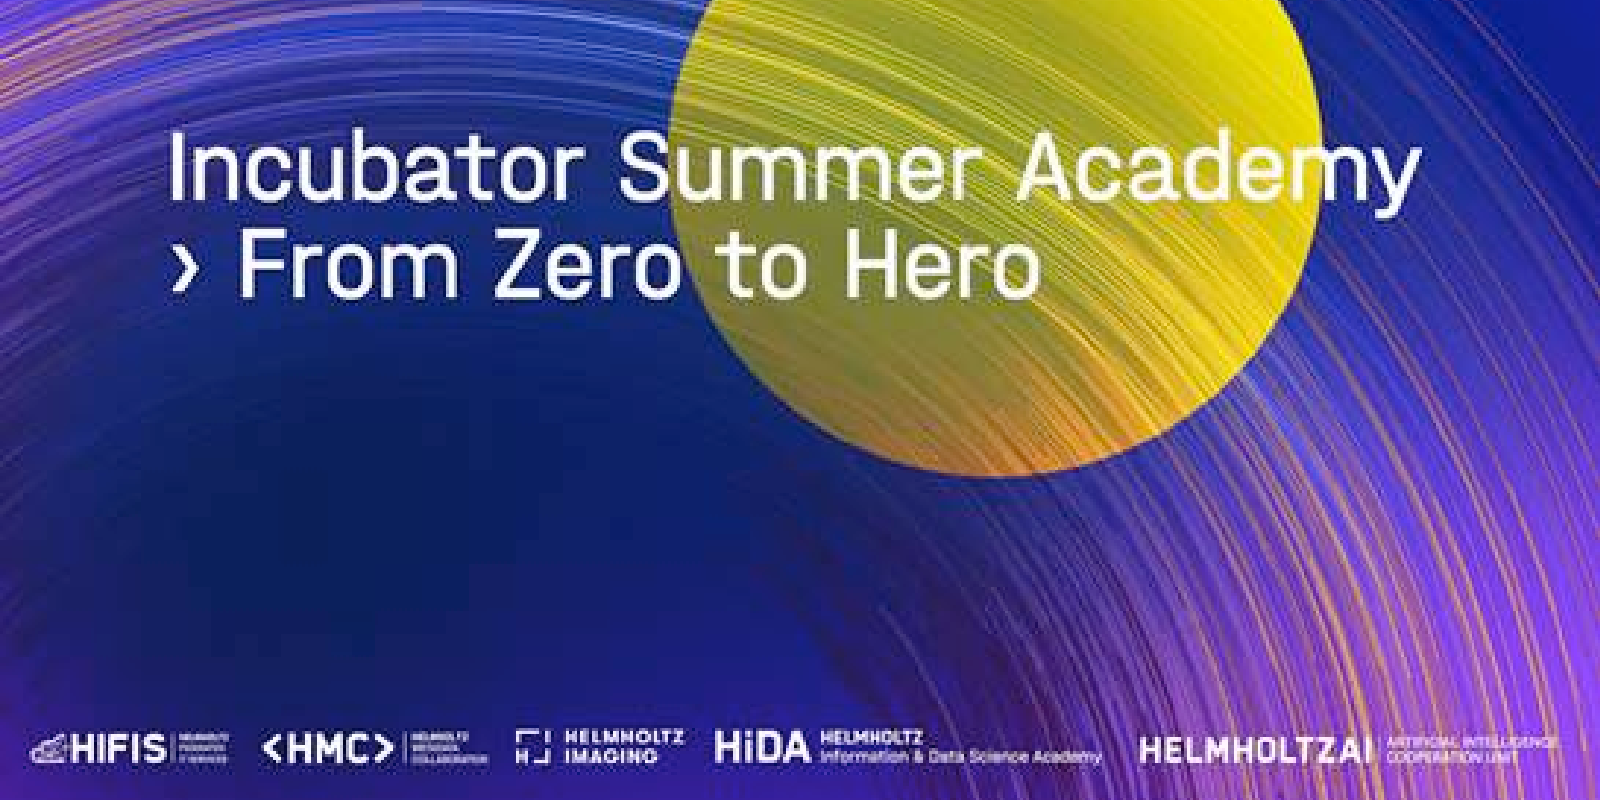 Decorative image to promote the Incubator Summer Academy "From Zero to Hero"